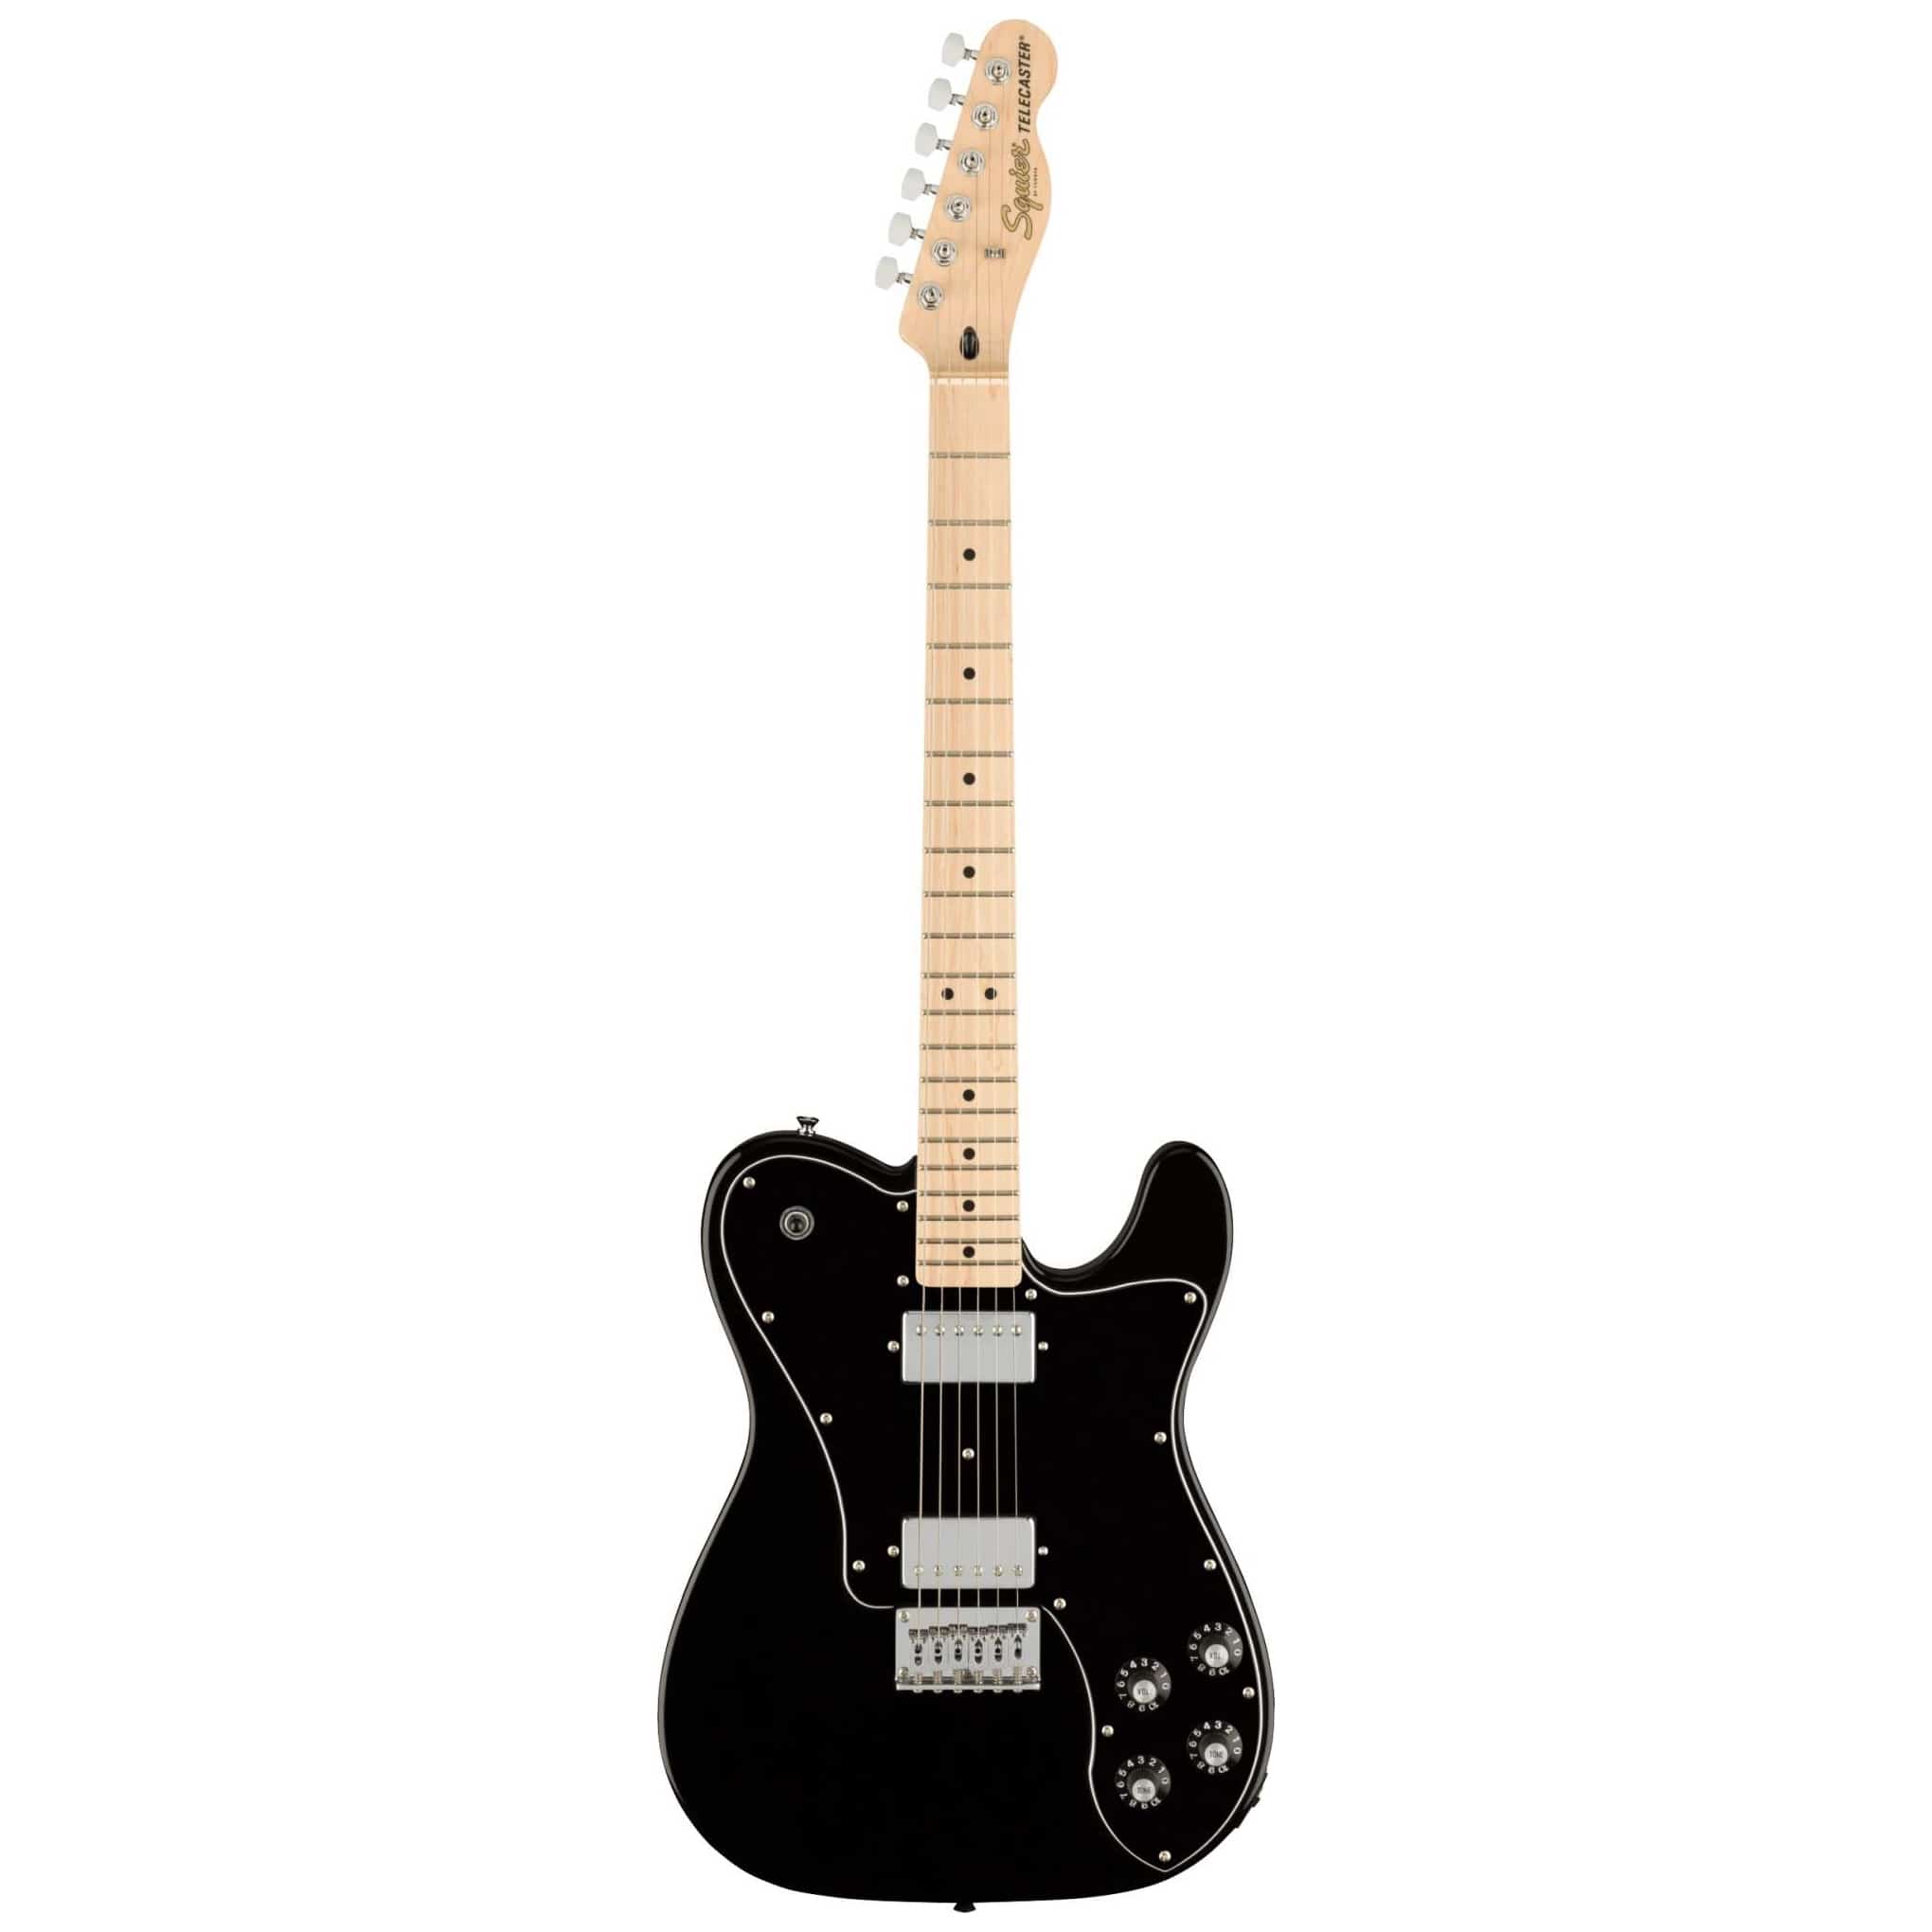 Squier by Fender Affinity Telecaster DLX MN BLK